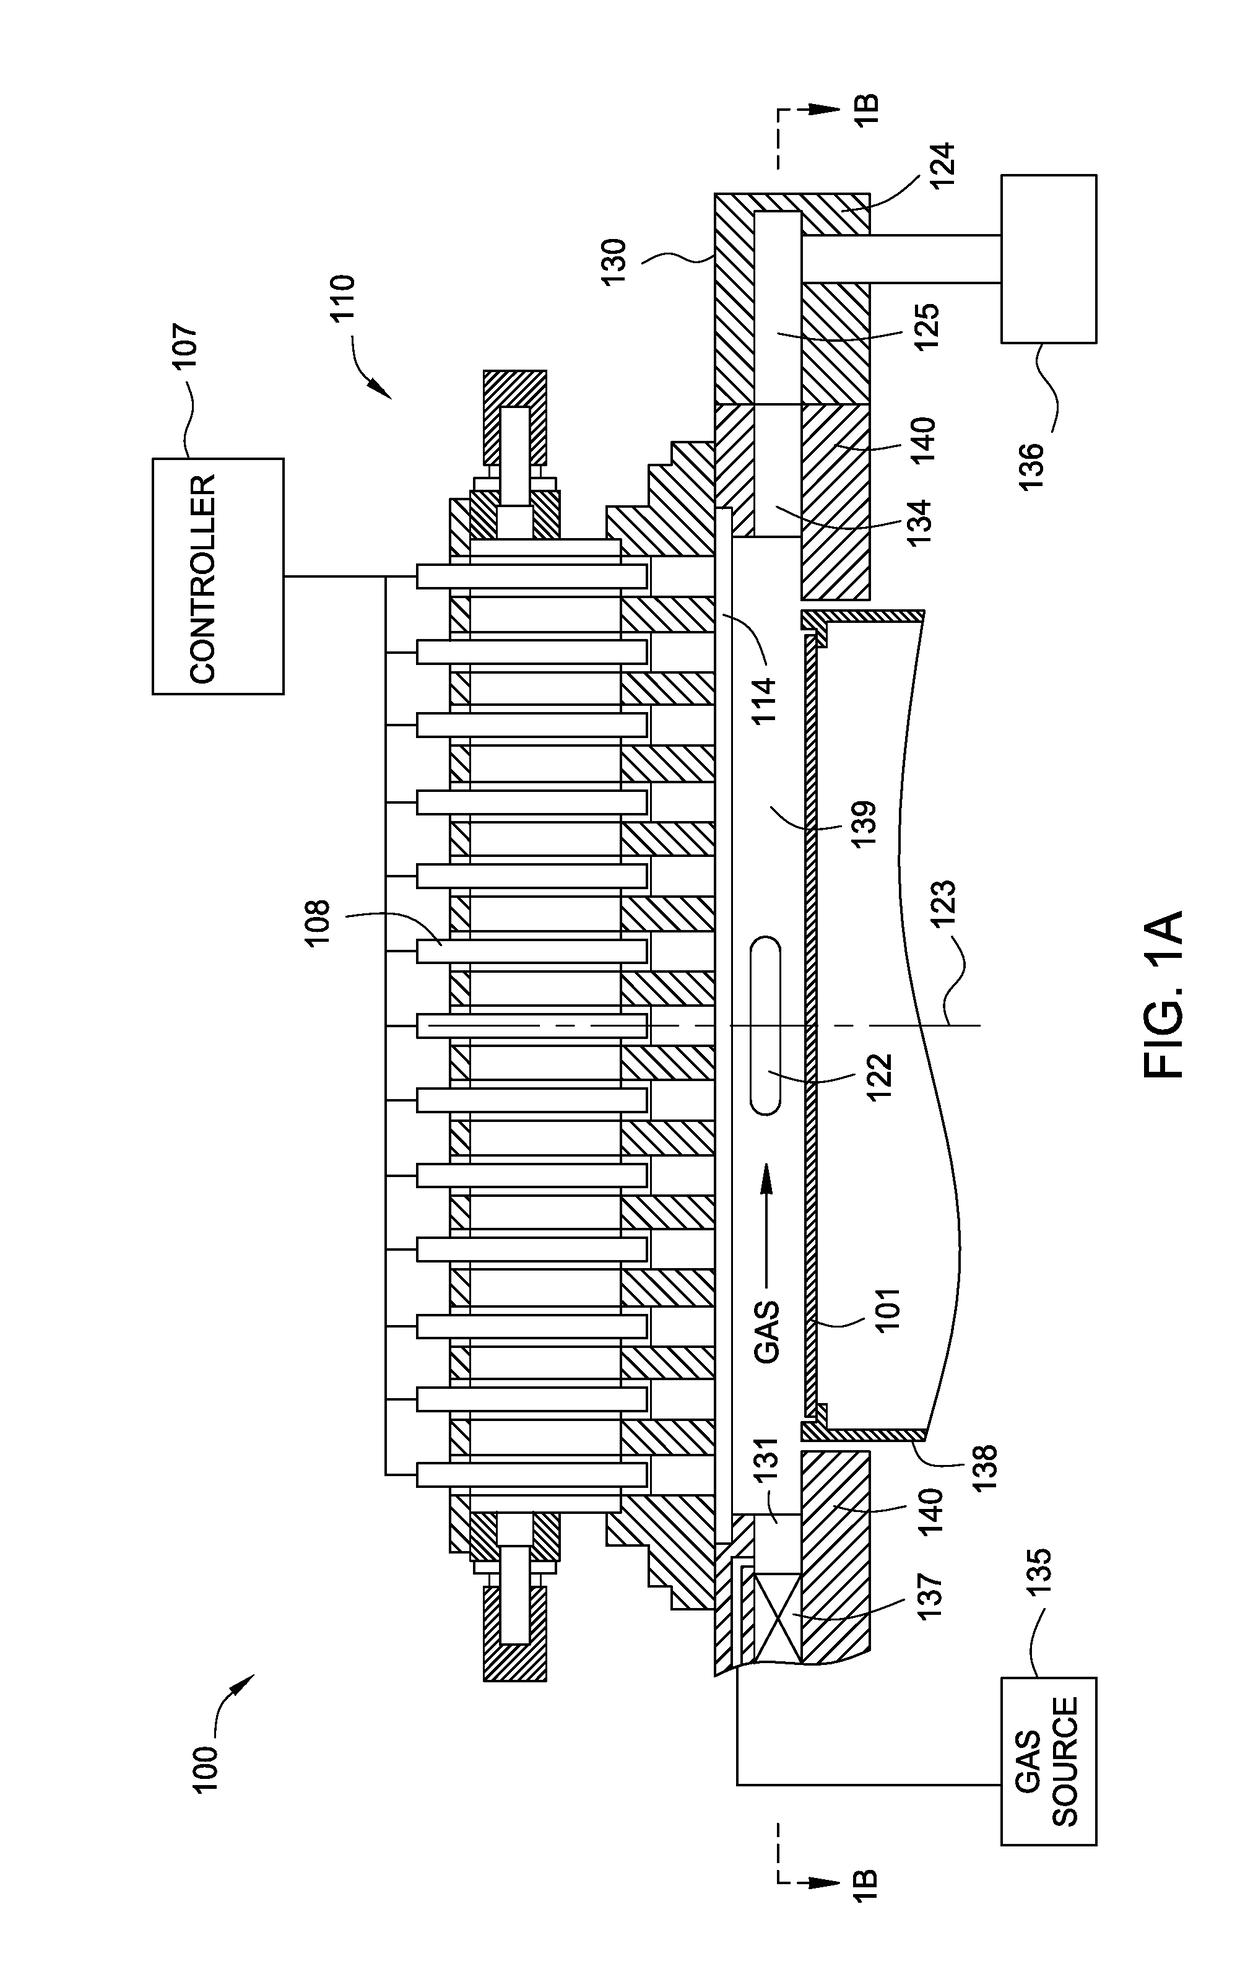 Side inject nozzle design for processing chamber